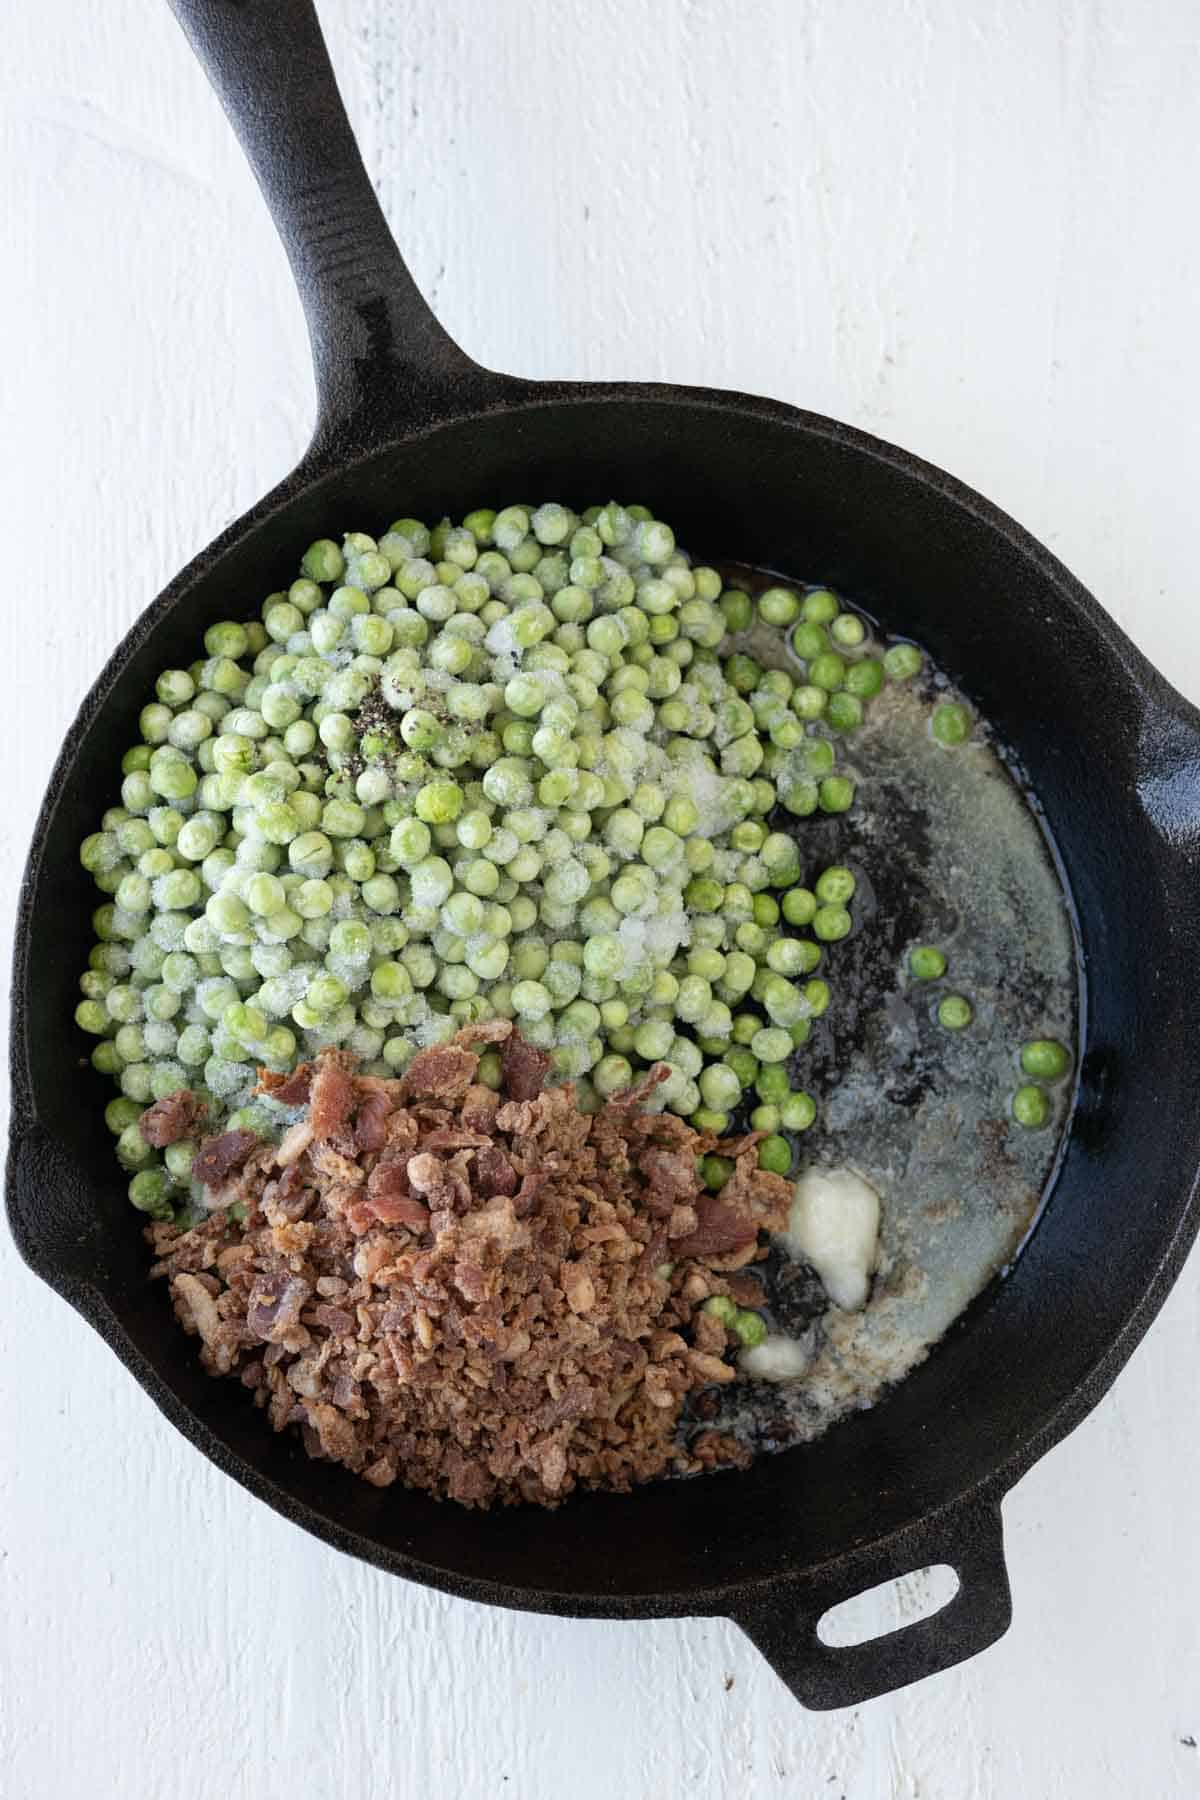 Frozen green peas, fried bacon pieces, butter, and garlic paste in a skillet.